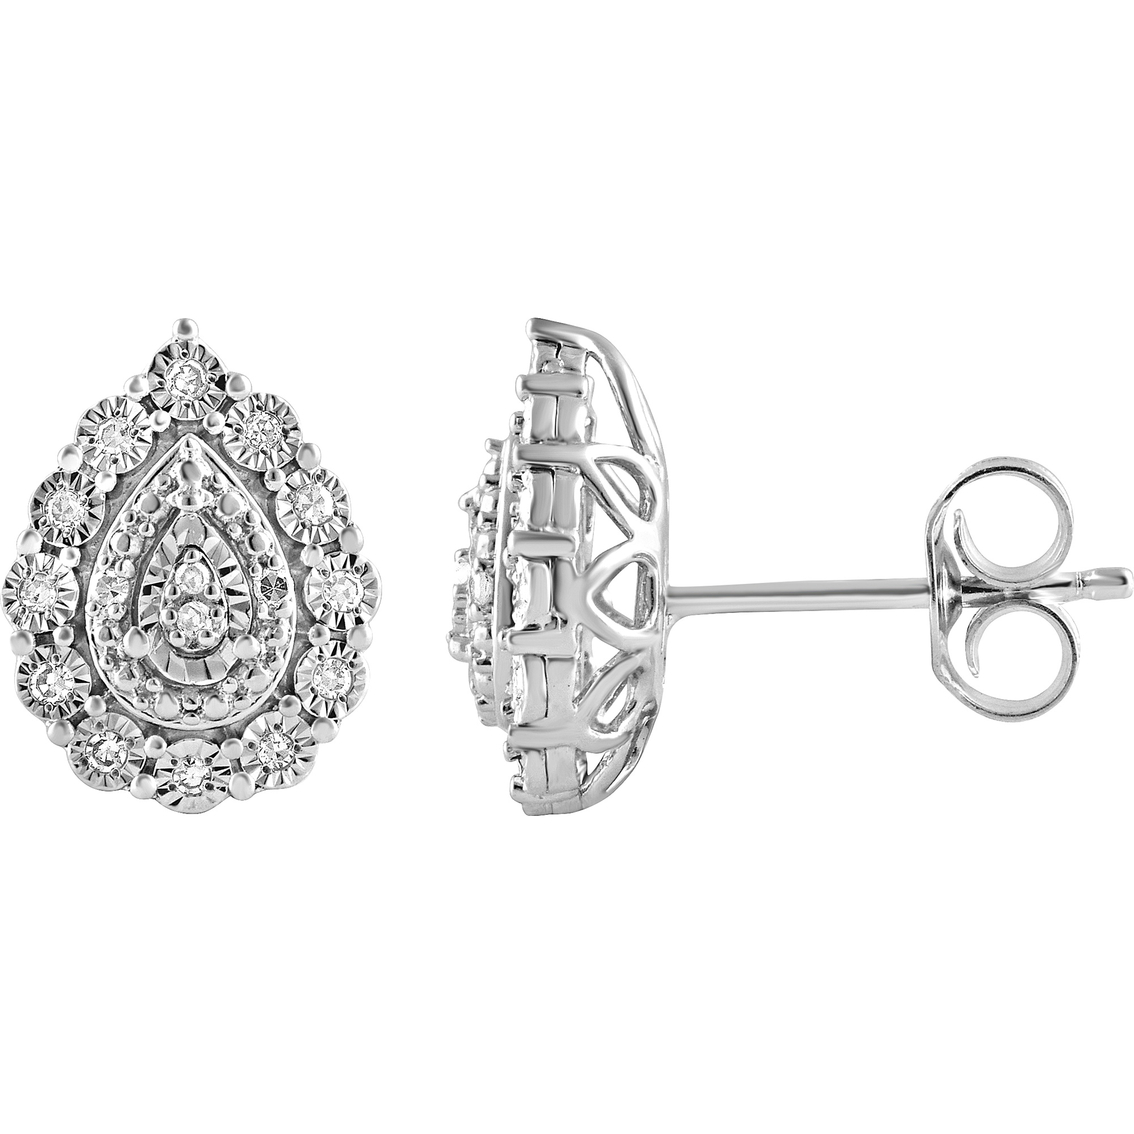 Sterling Silver 1/3 CTW Diamond Pear Shape Ring, Earring and Pendant Set - Image 4 of 4